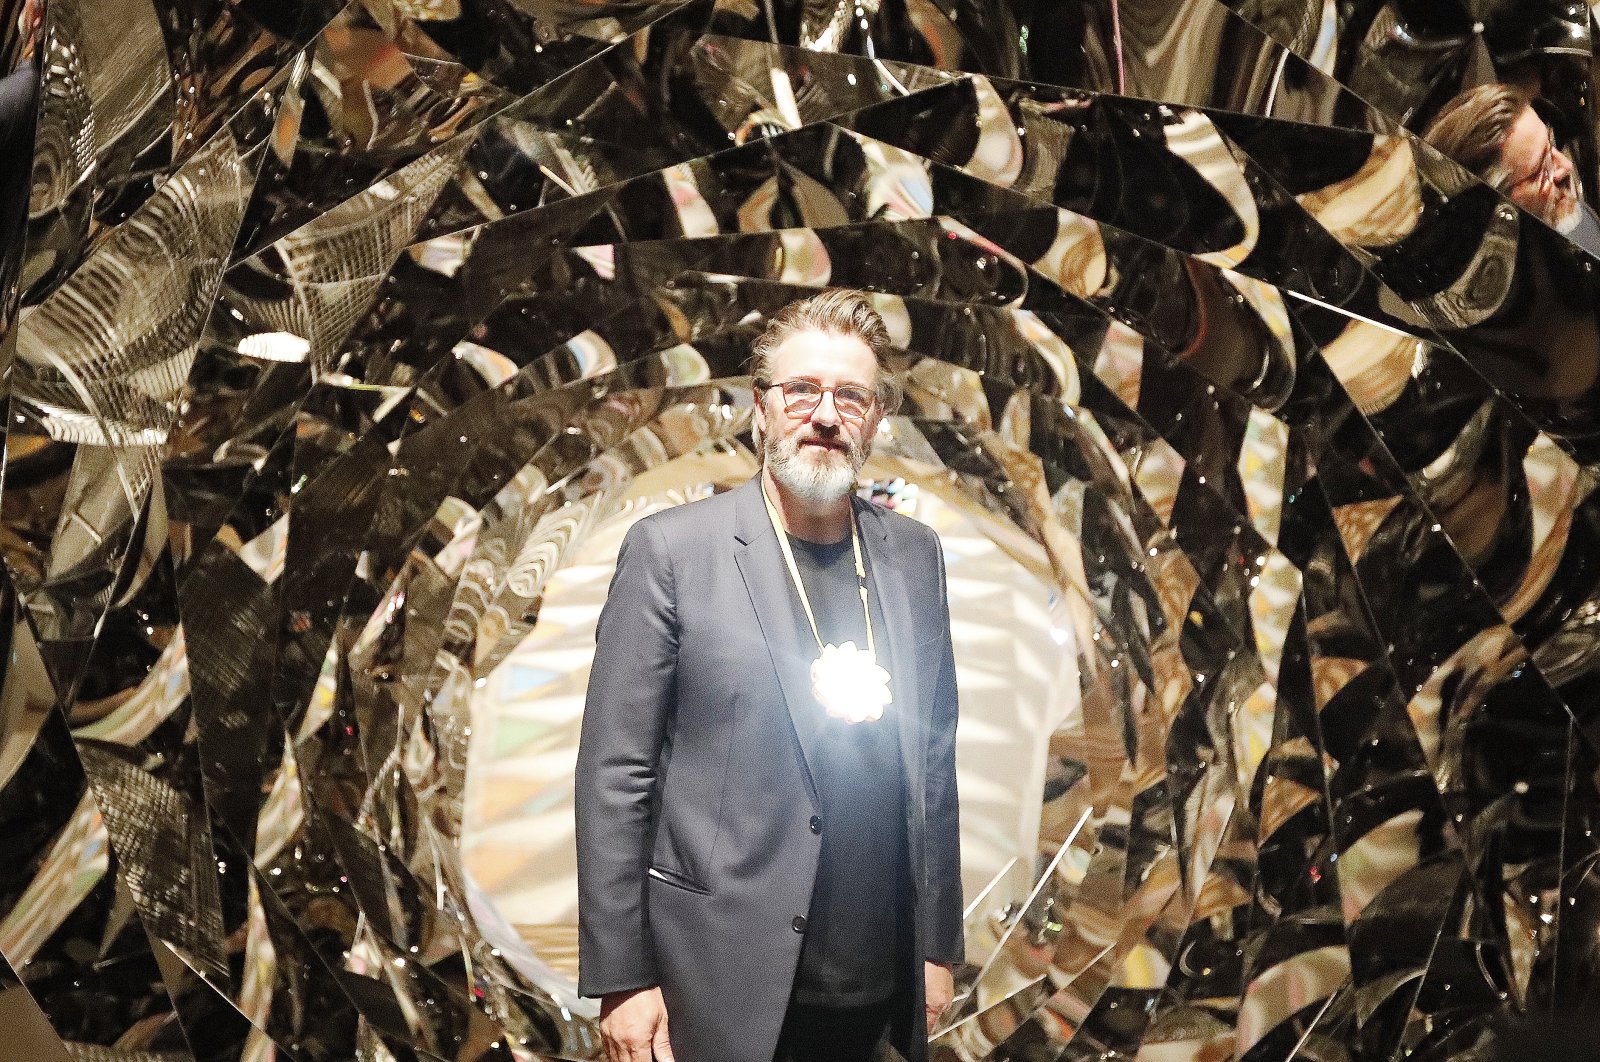 Olafur Eliasson poses at the installation &quot;Your Spiral View&quot; as part of the exhibition Olafur Eliasson: &quot;In real life&quot; at the Tate Modern Gallery in London, U.K., July 9, 2019. (AP Photo)